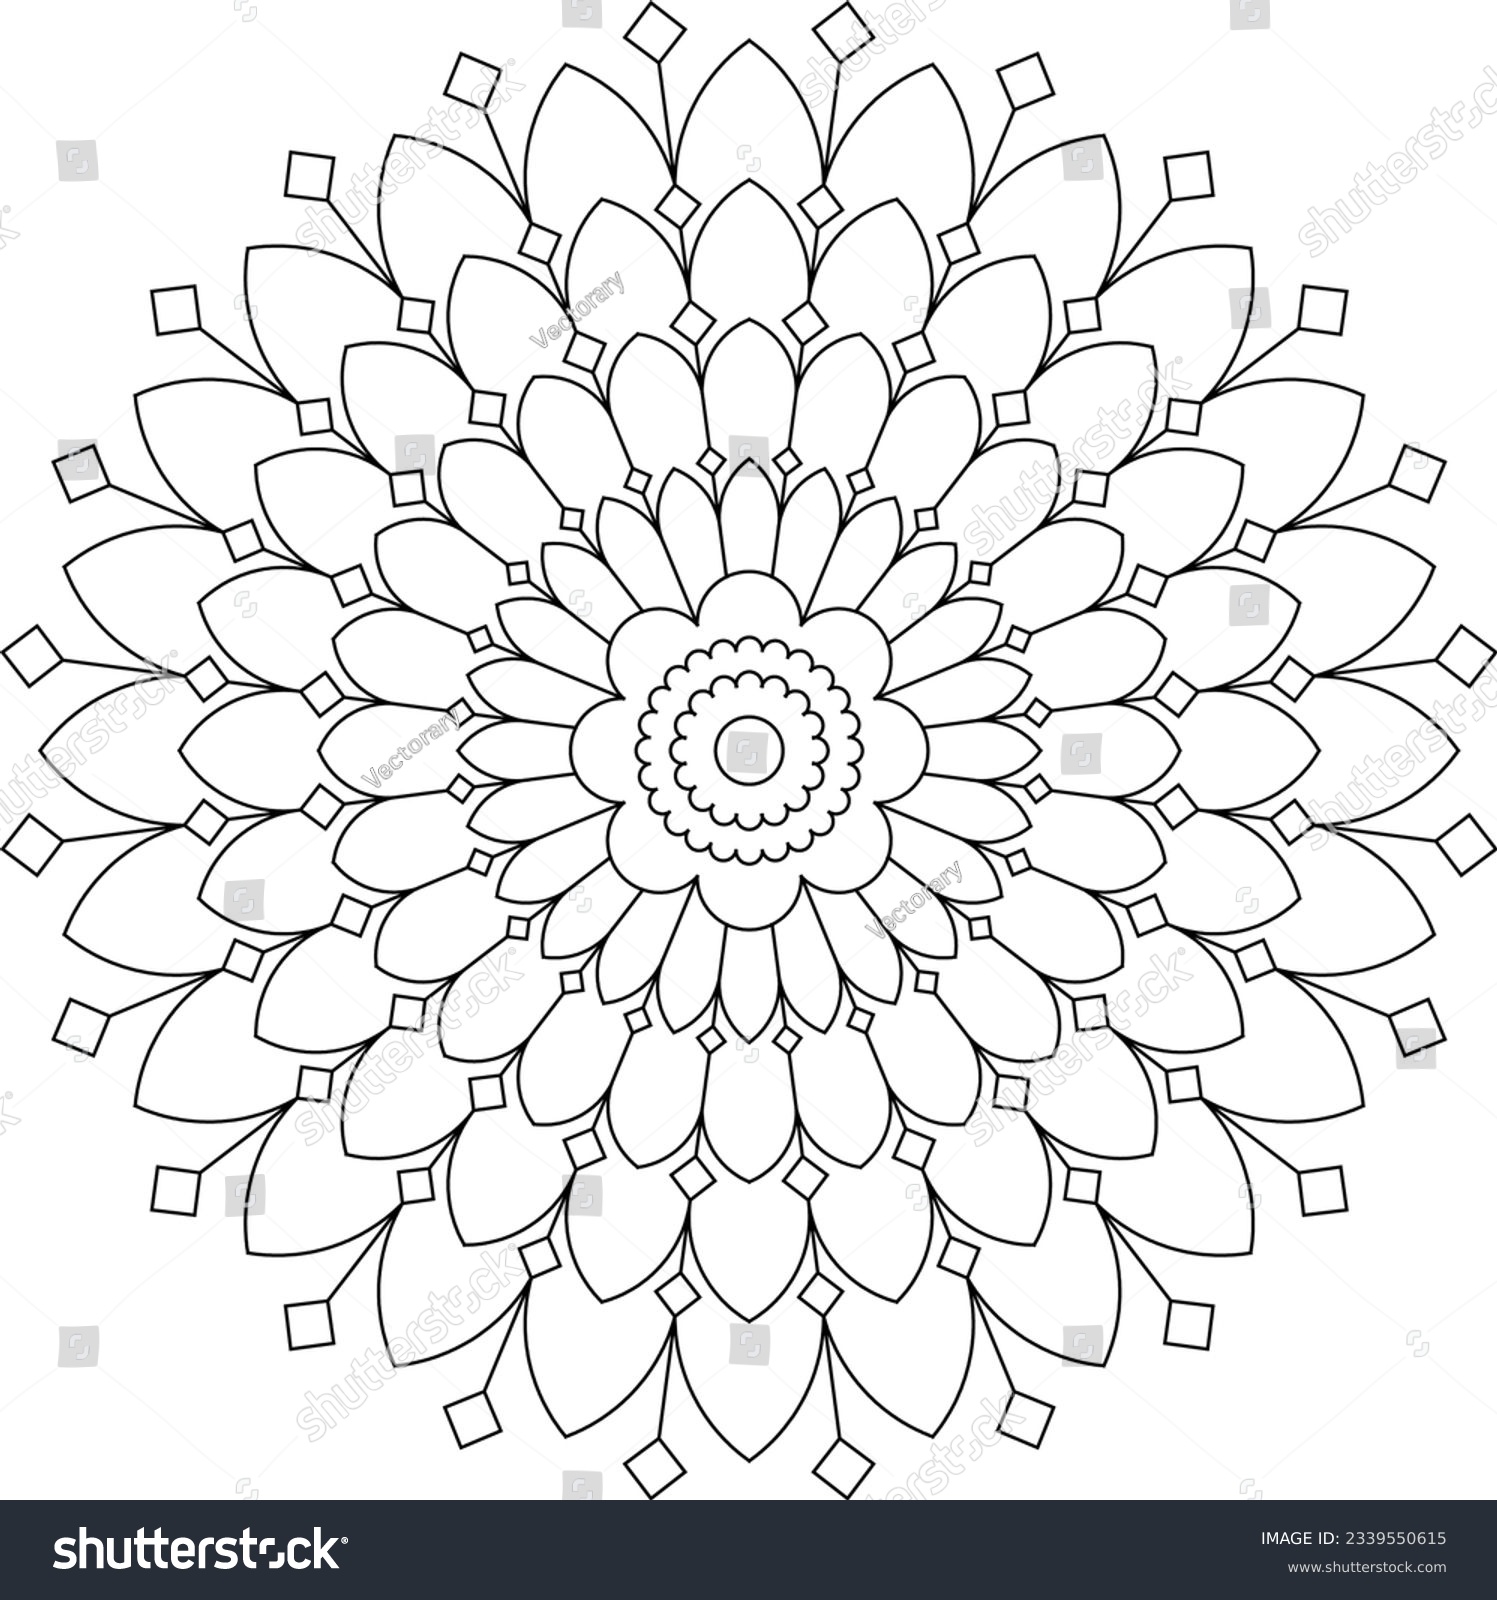 Adult coloring pages simple images stock photos d objects vectors